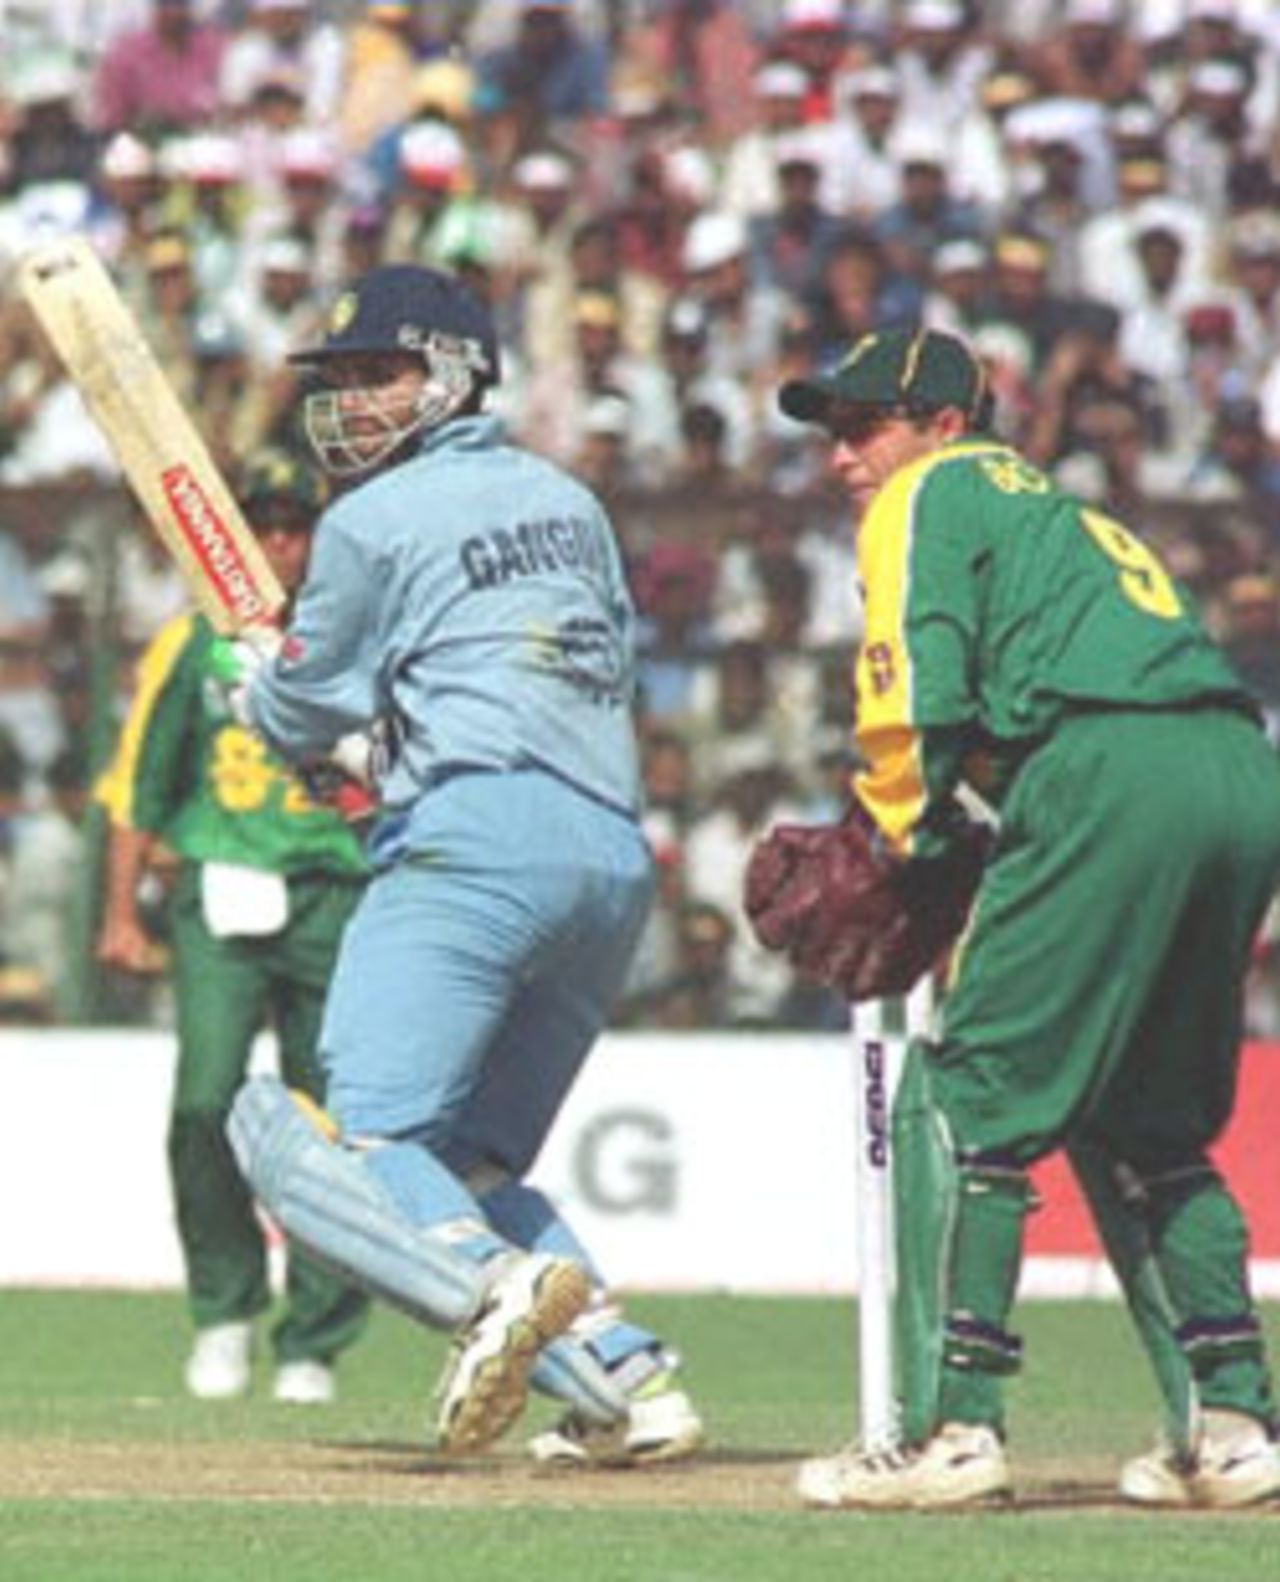 Indian skipper Sourav Ganguly (L) hits a boundary as South African wicketkeeper Mark Boucher looks on during the second match of the one day series between India and South Africa at Keenam Stadum, Jamshedpur 12 March 2000. India won the match by seven wickets. Sourav Ganguly scored a century and became man of the match